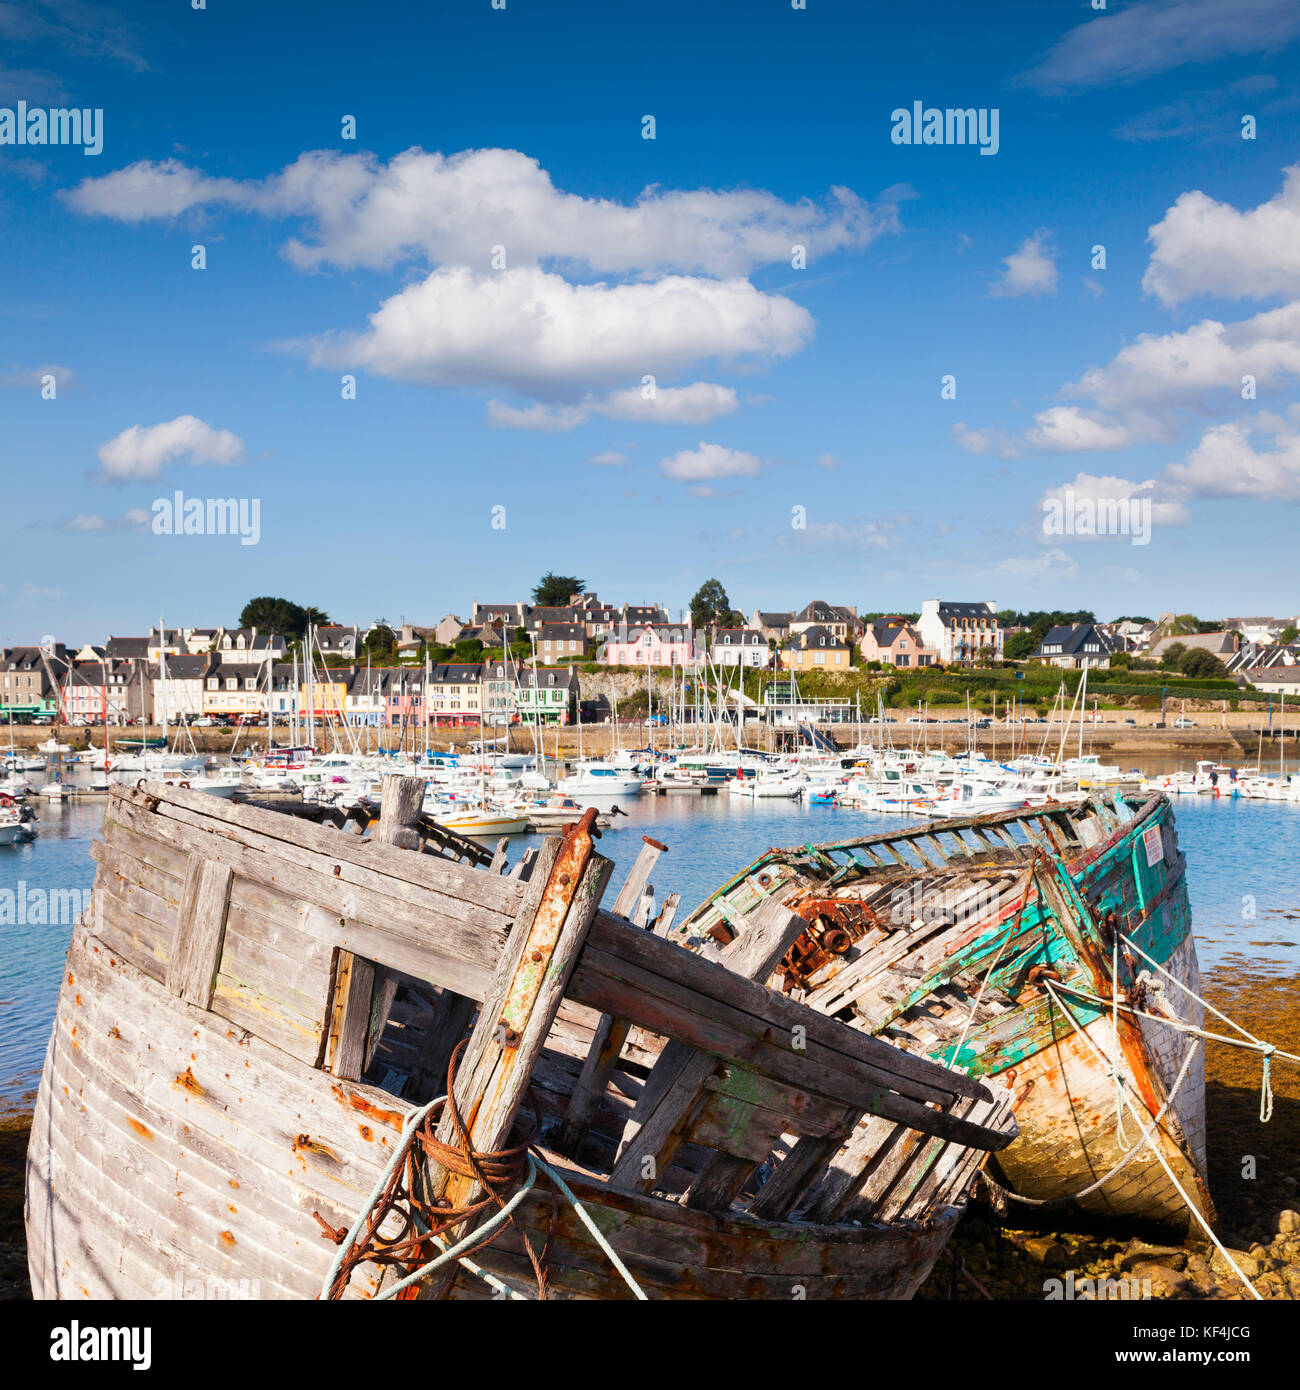 The old town and fishing boats at Camaret-sur-Mer, Brittany, France. Stock Photo